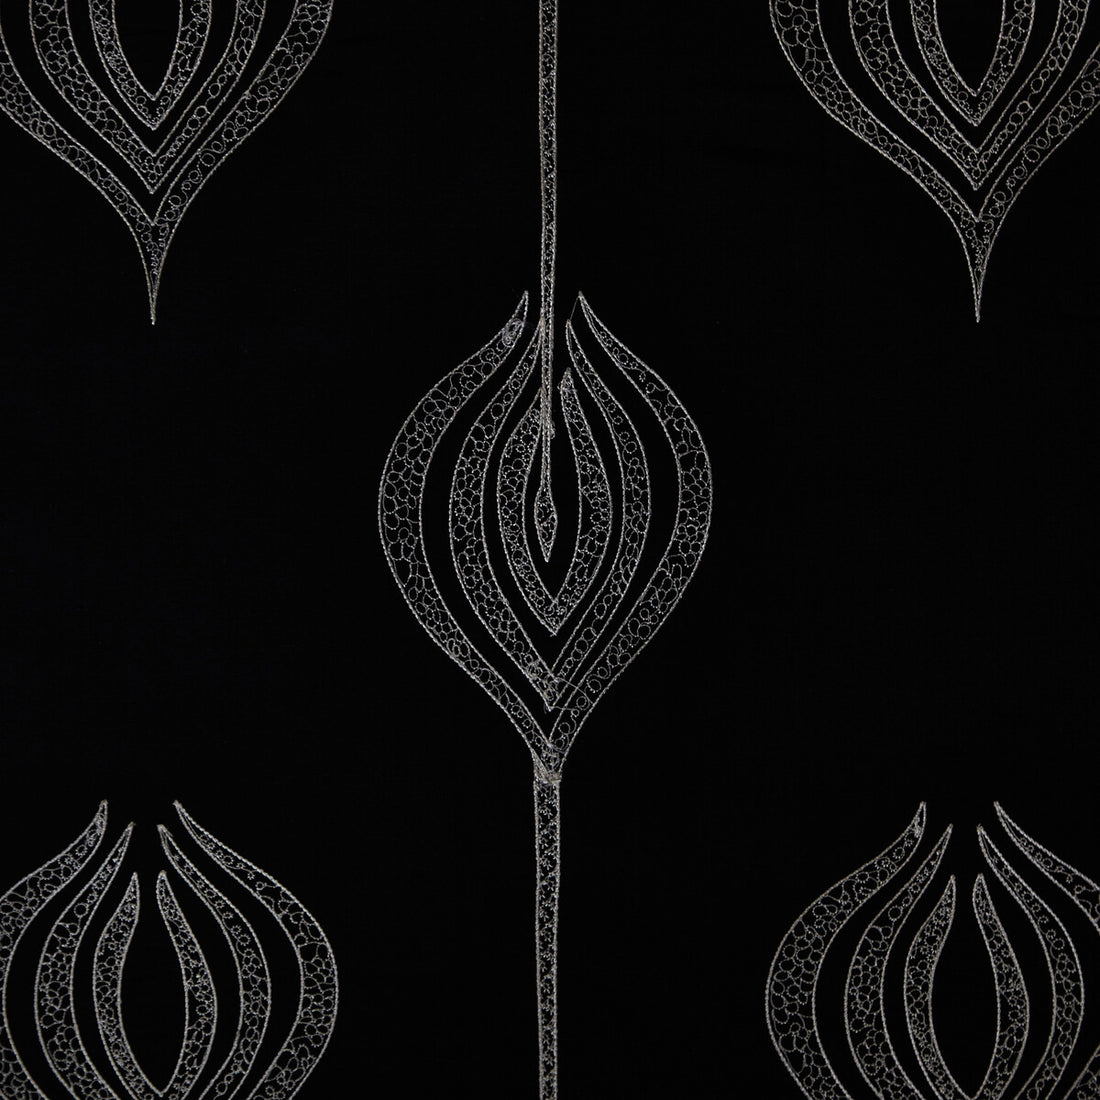 Tulip Embroidery fabric in black color - pattern GWF-2928.816.0 - by Lee Jofa Modern in the Allegra Hicks II collection